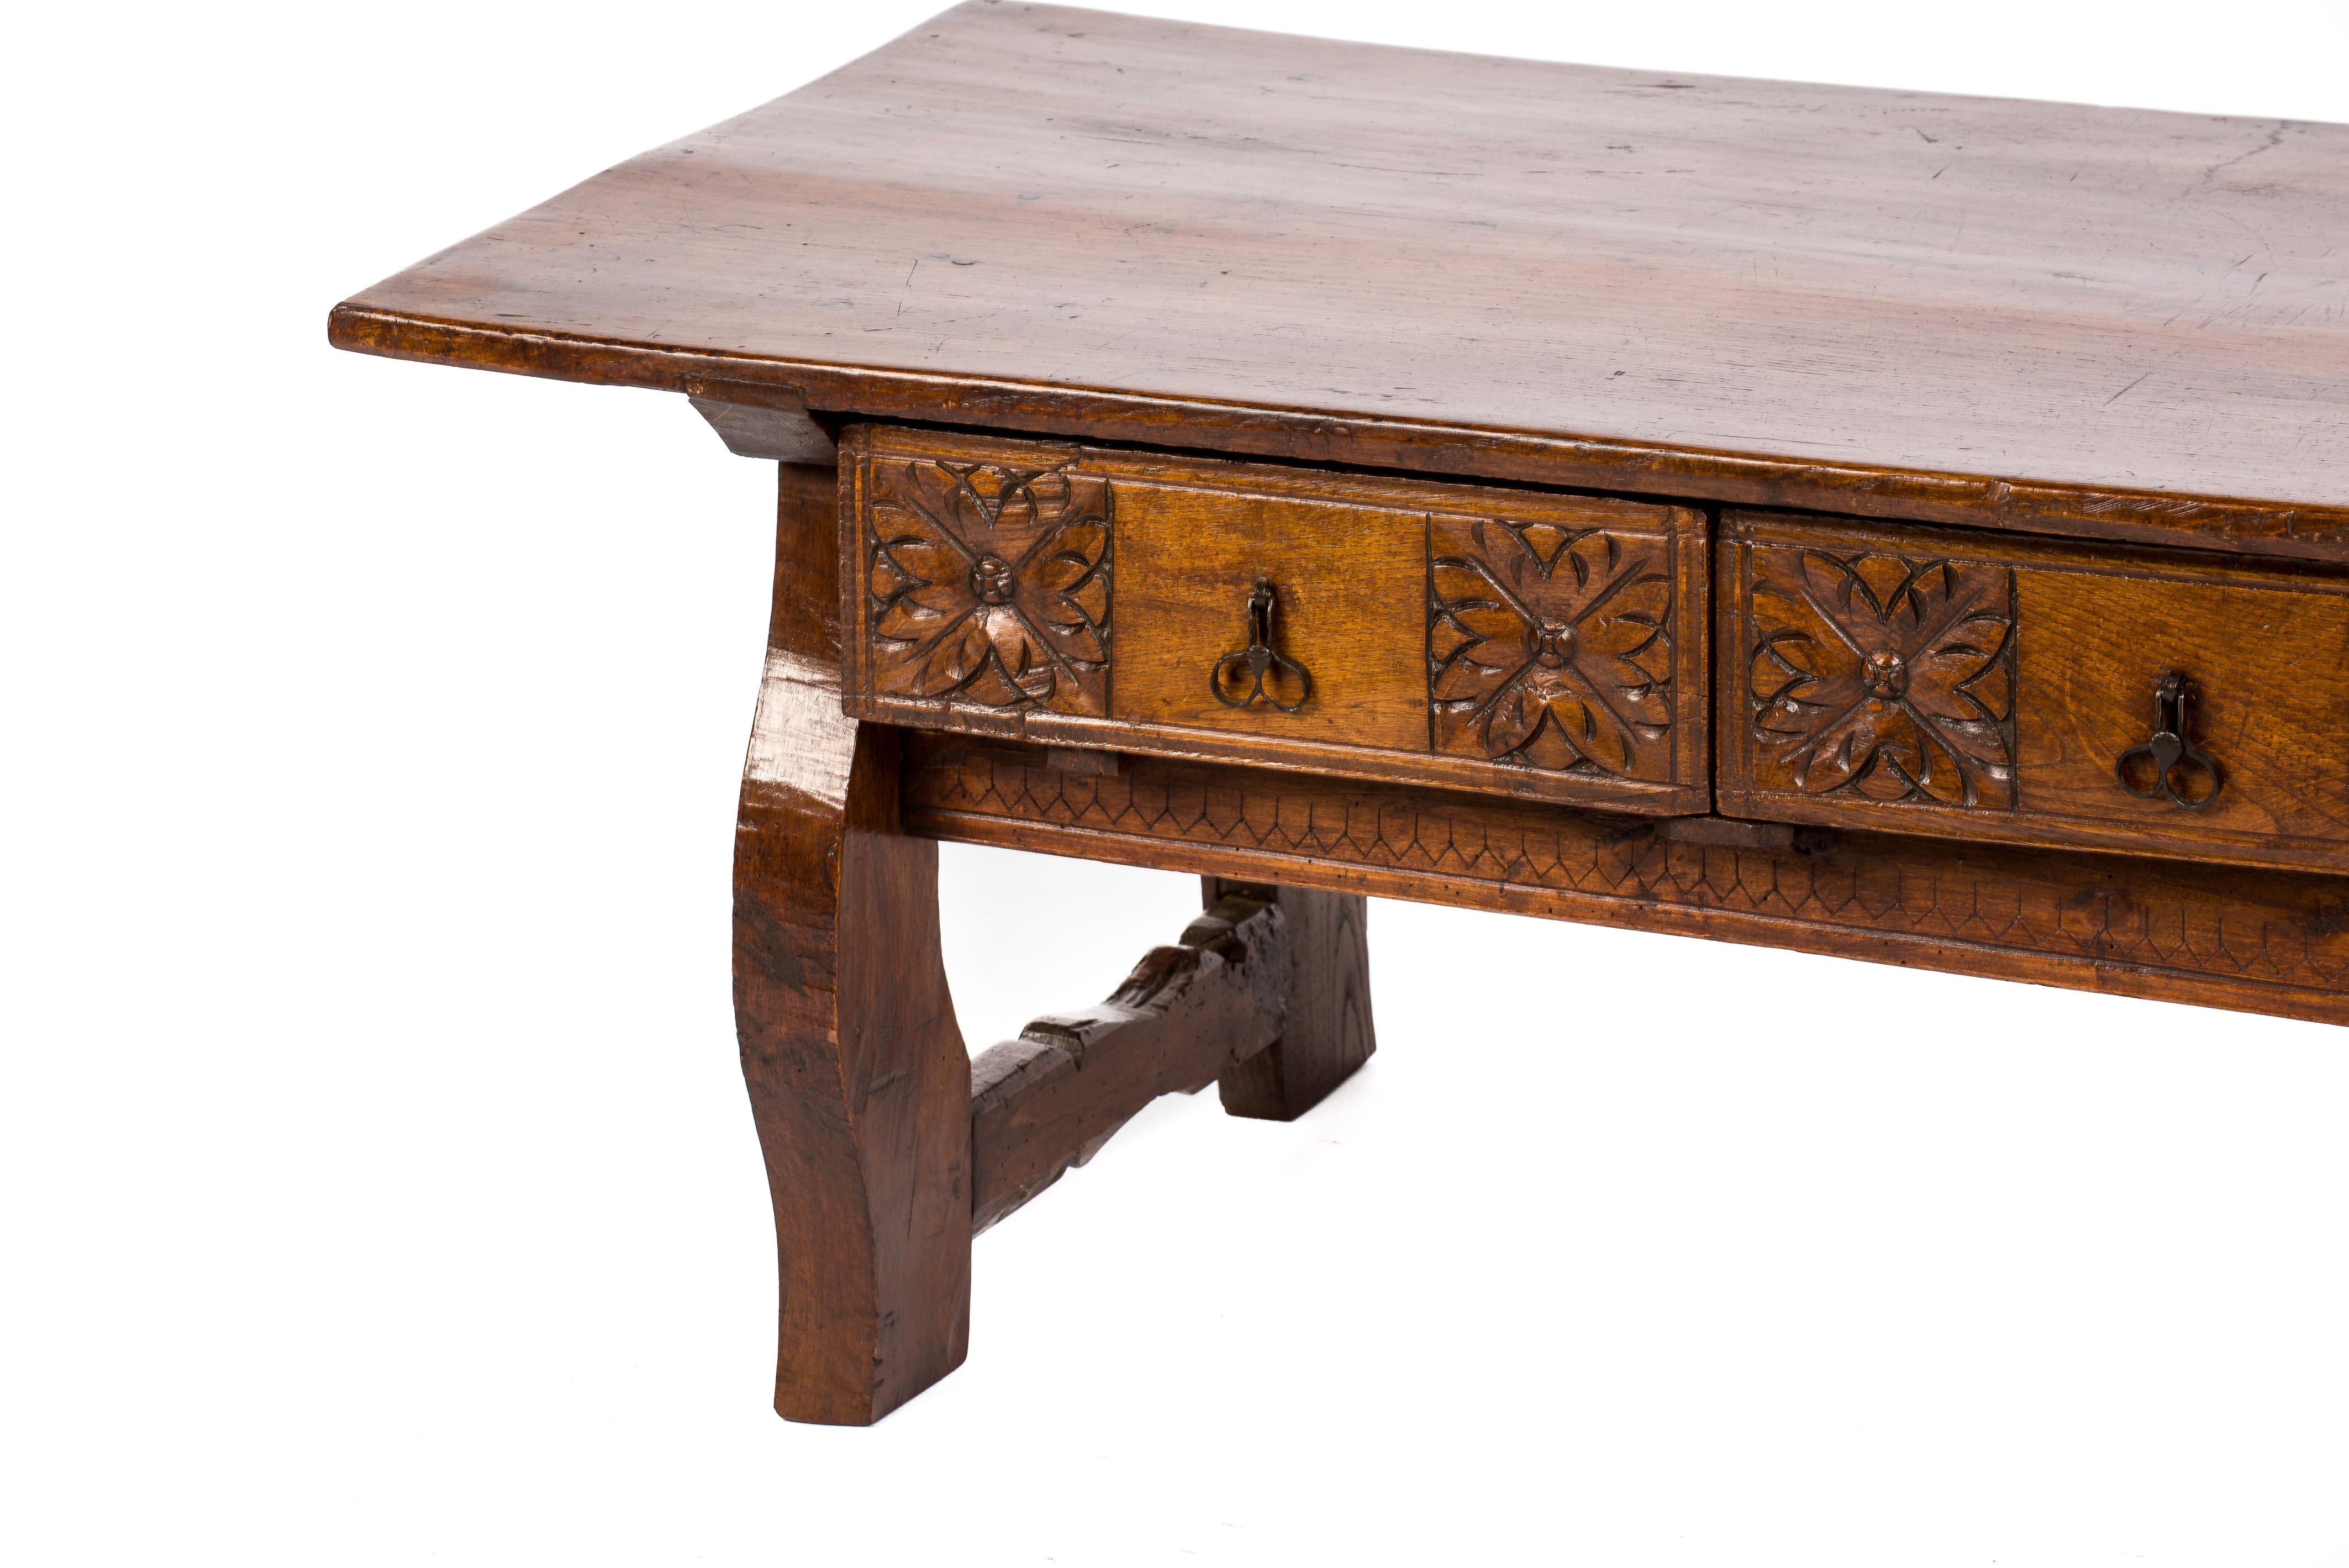 19th Century Antique Spanish Baroque Coffee Table in Solid Chestnut with Honey Color Finish